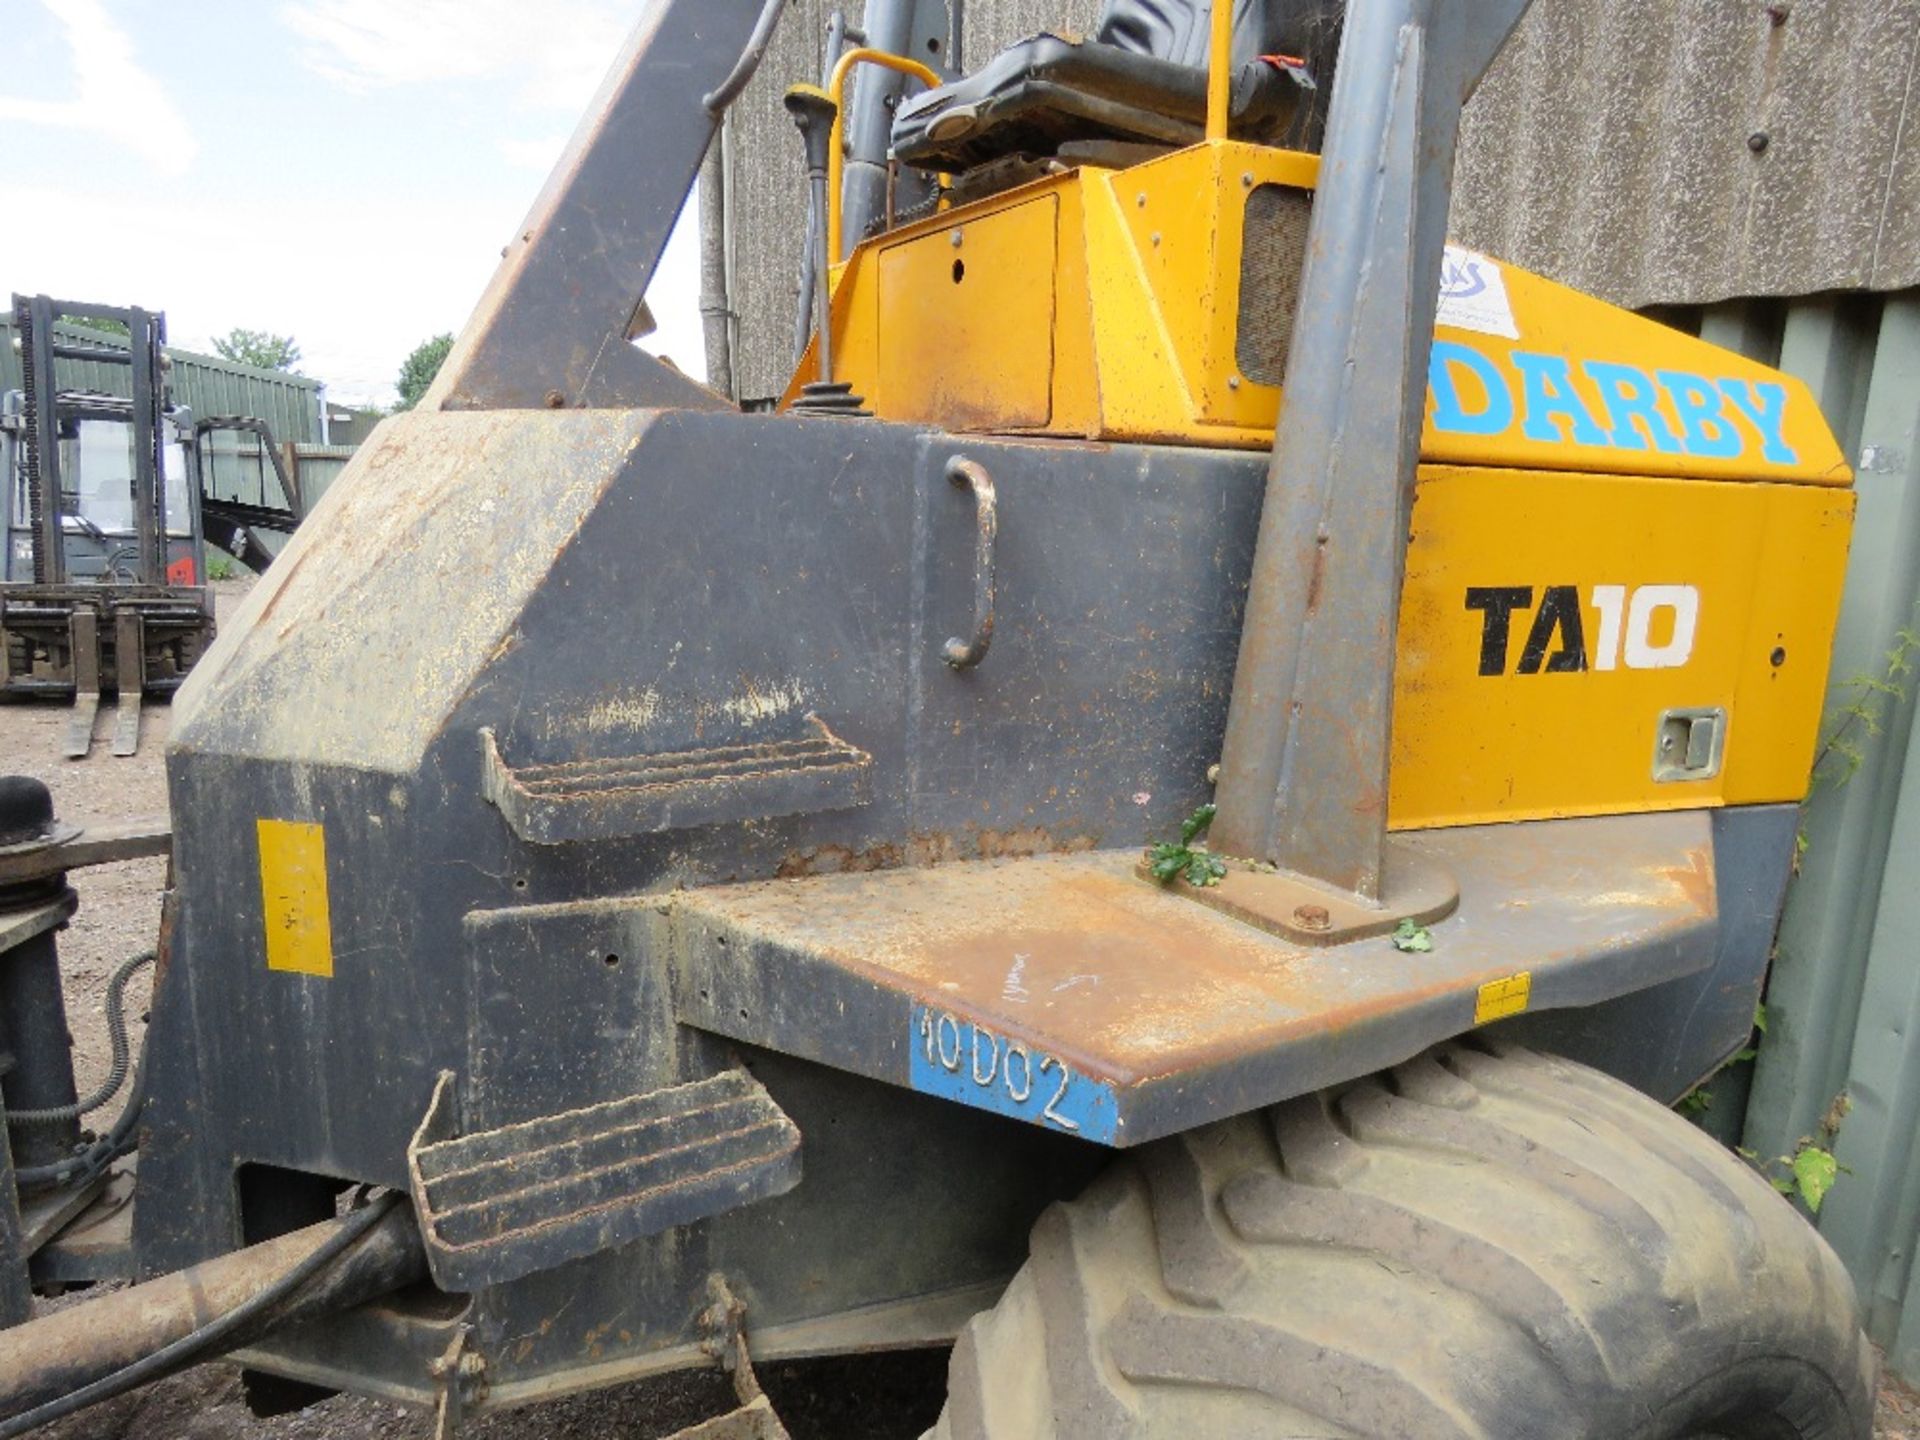 TEREX TA10 SITE DUMPER, 10 TONNE CAPACITY, YEAR 2008 BUILD. 4028 REC HOURS. PN:10D02. WHEN TESTED W - Image 12 of 15